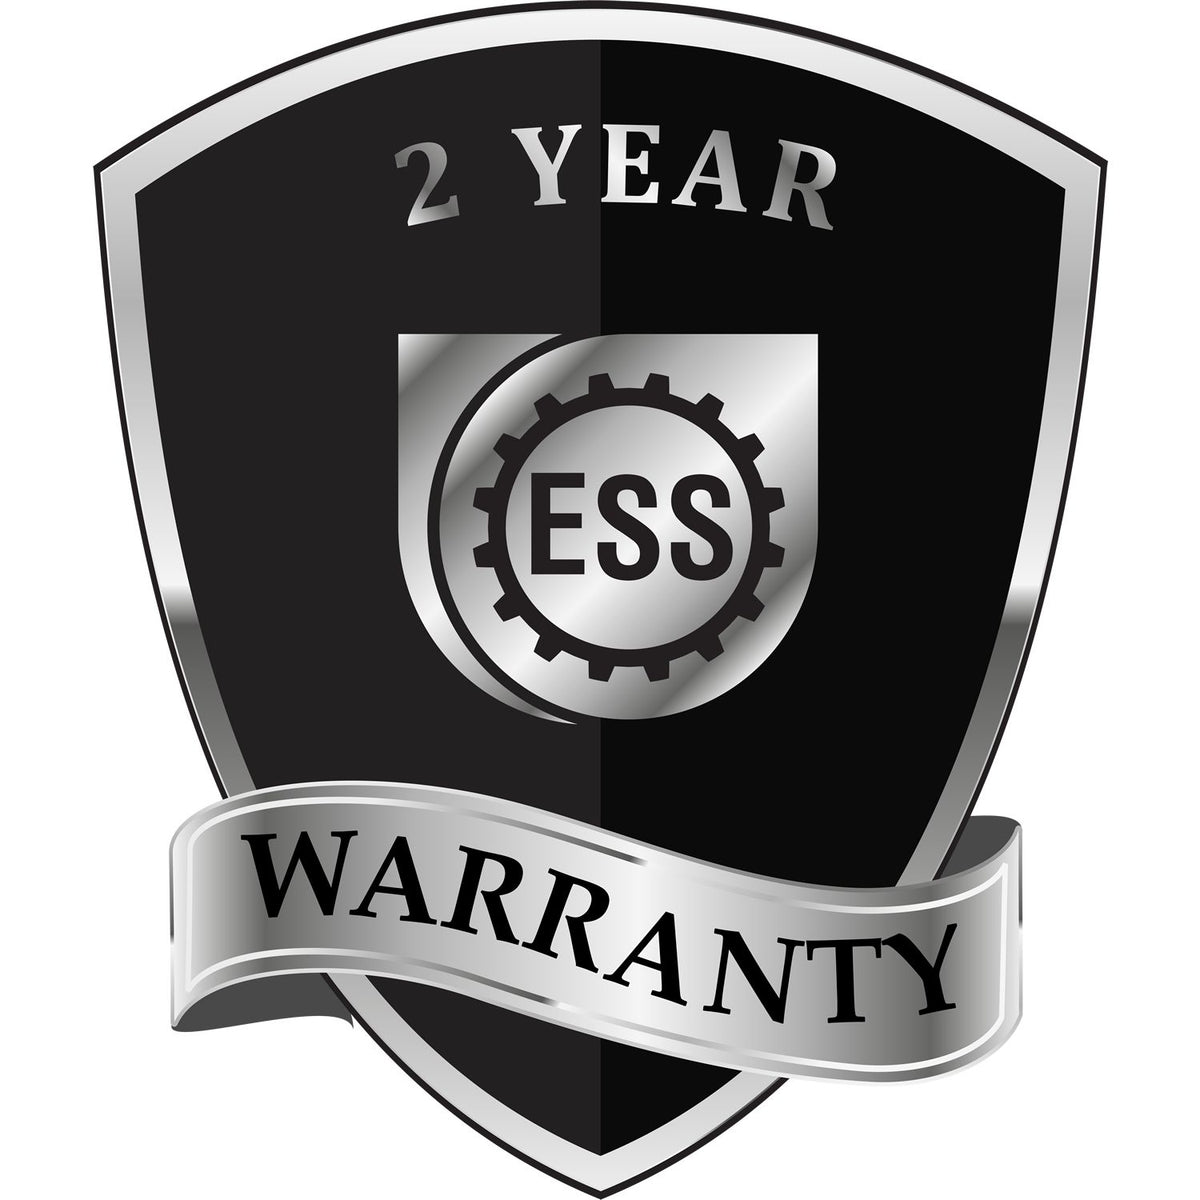 A black and silver badge or emblem showing warranty information for the Gift Illinois Landscape Architect Seal